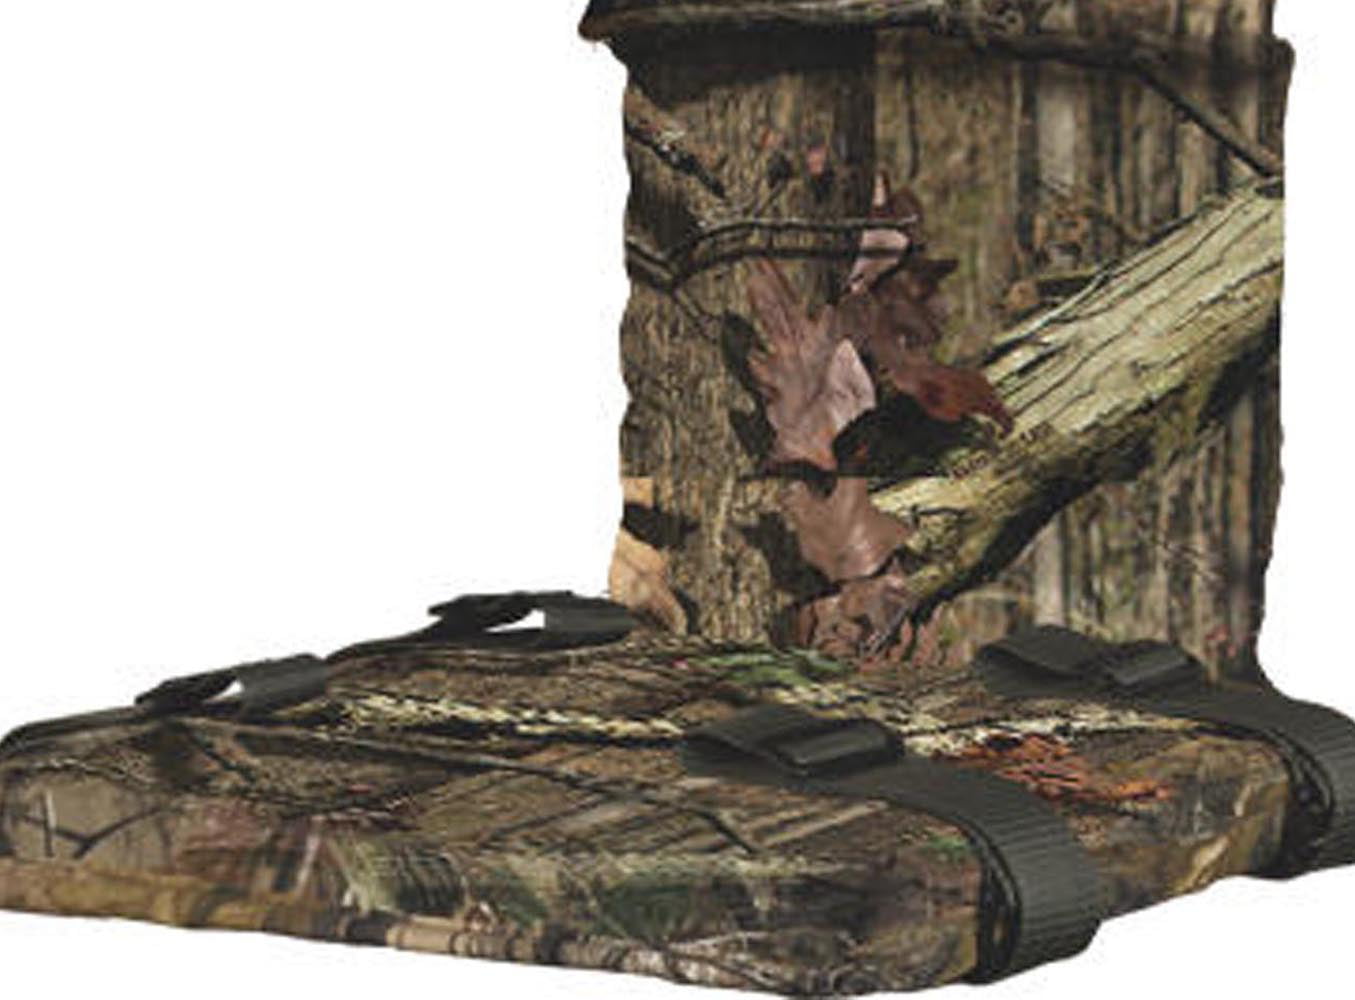 Summit Treestands Universal Seat for sale online 